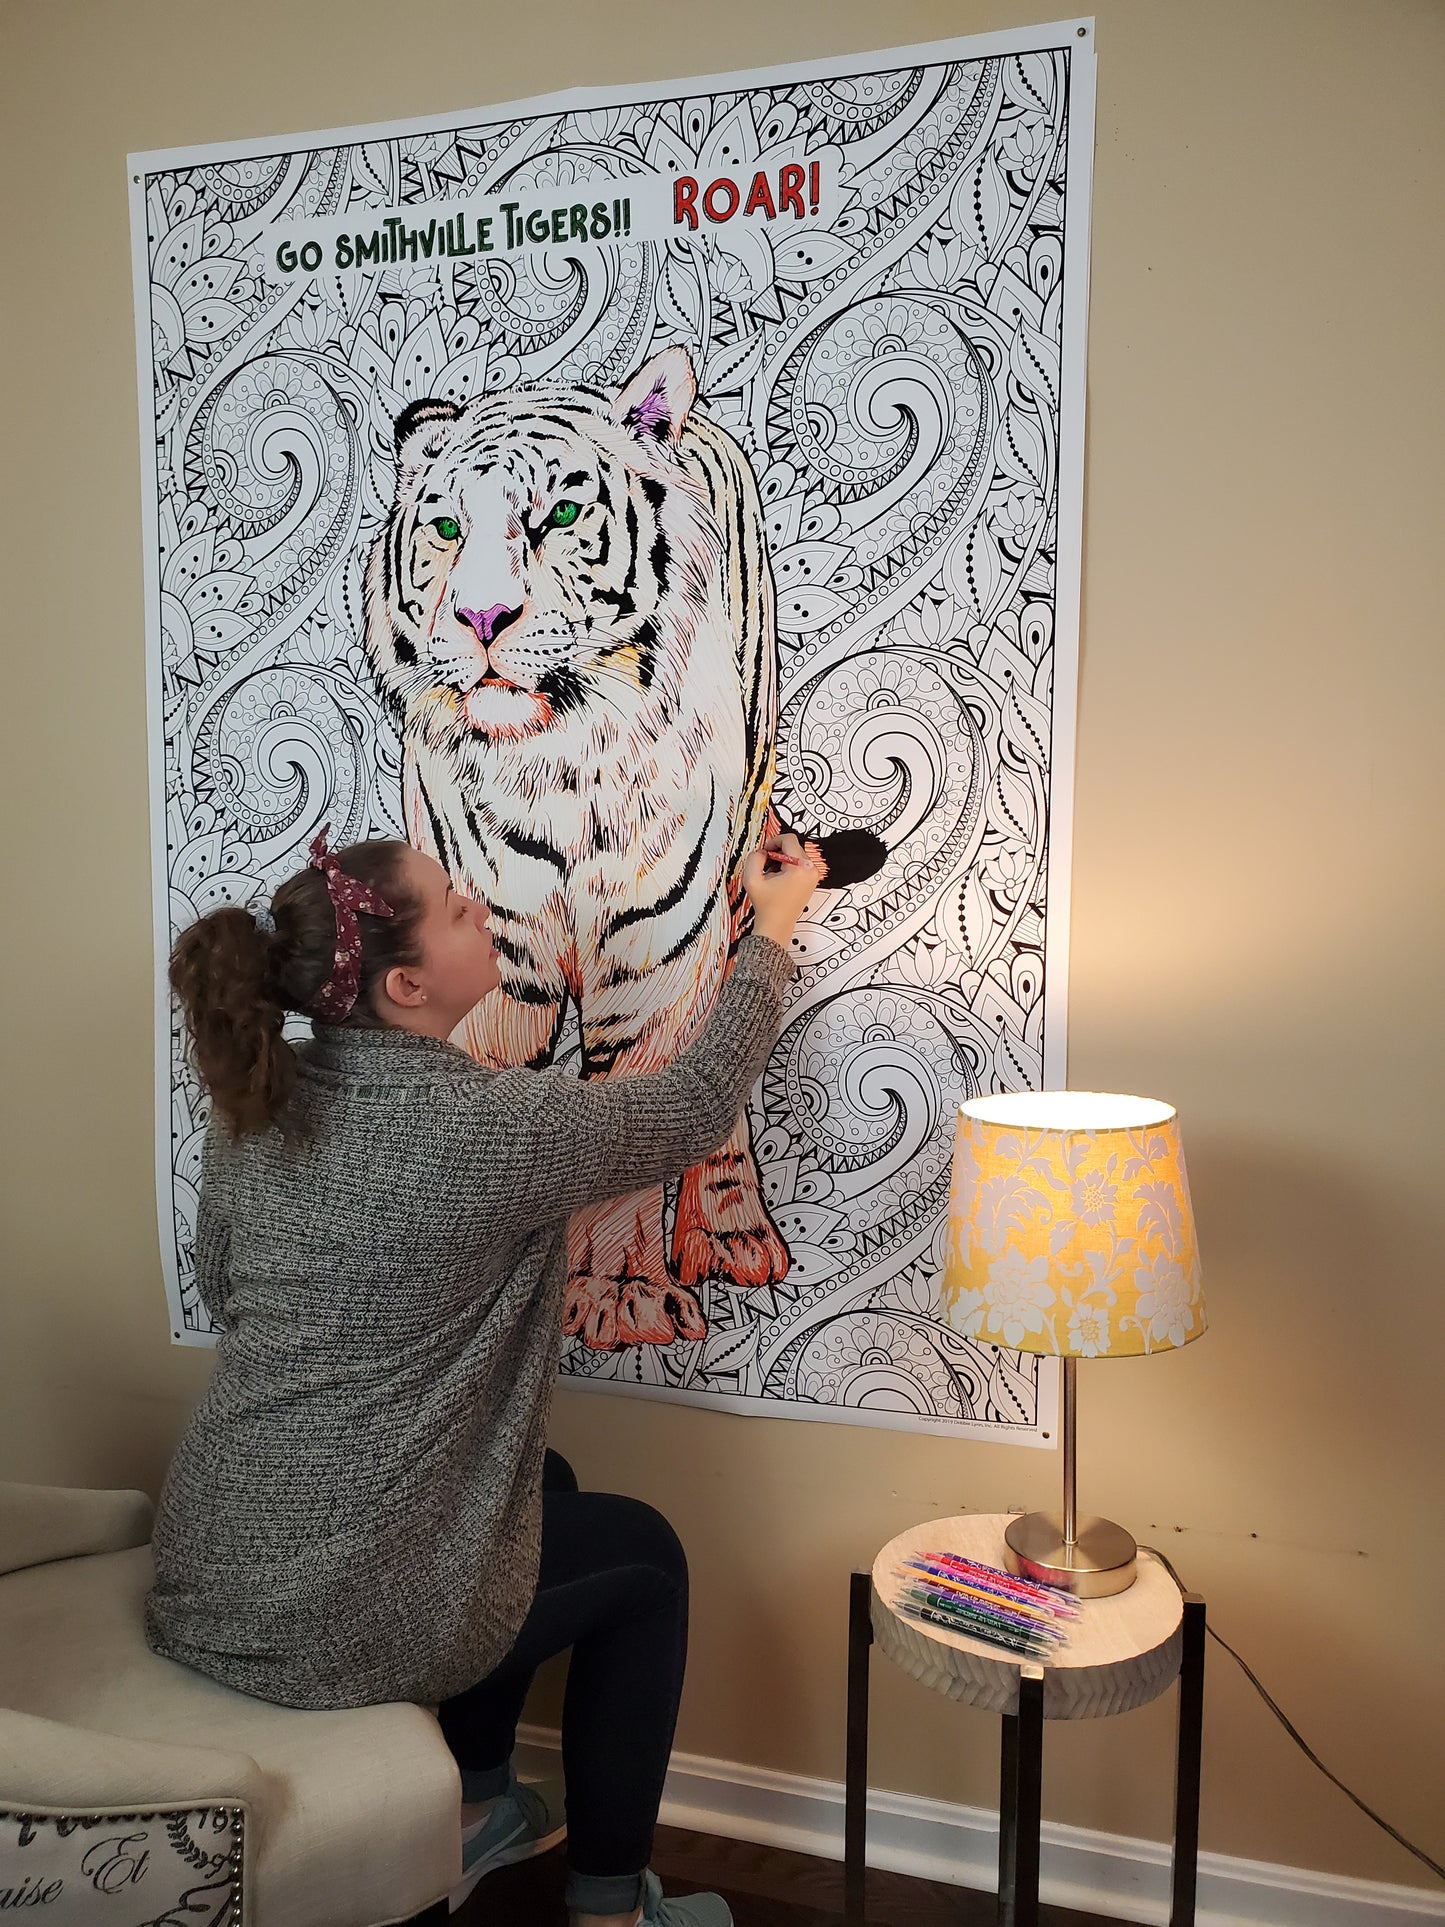 Tiger Personalized Giant Coloring Poster 48x63